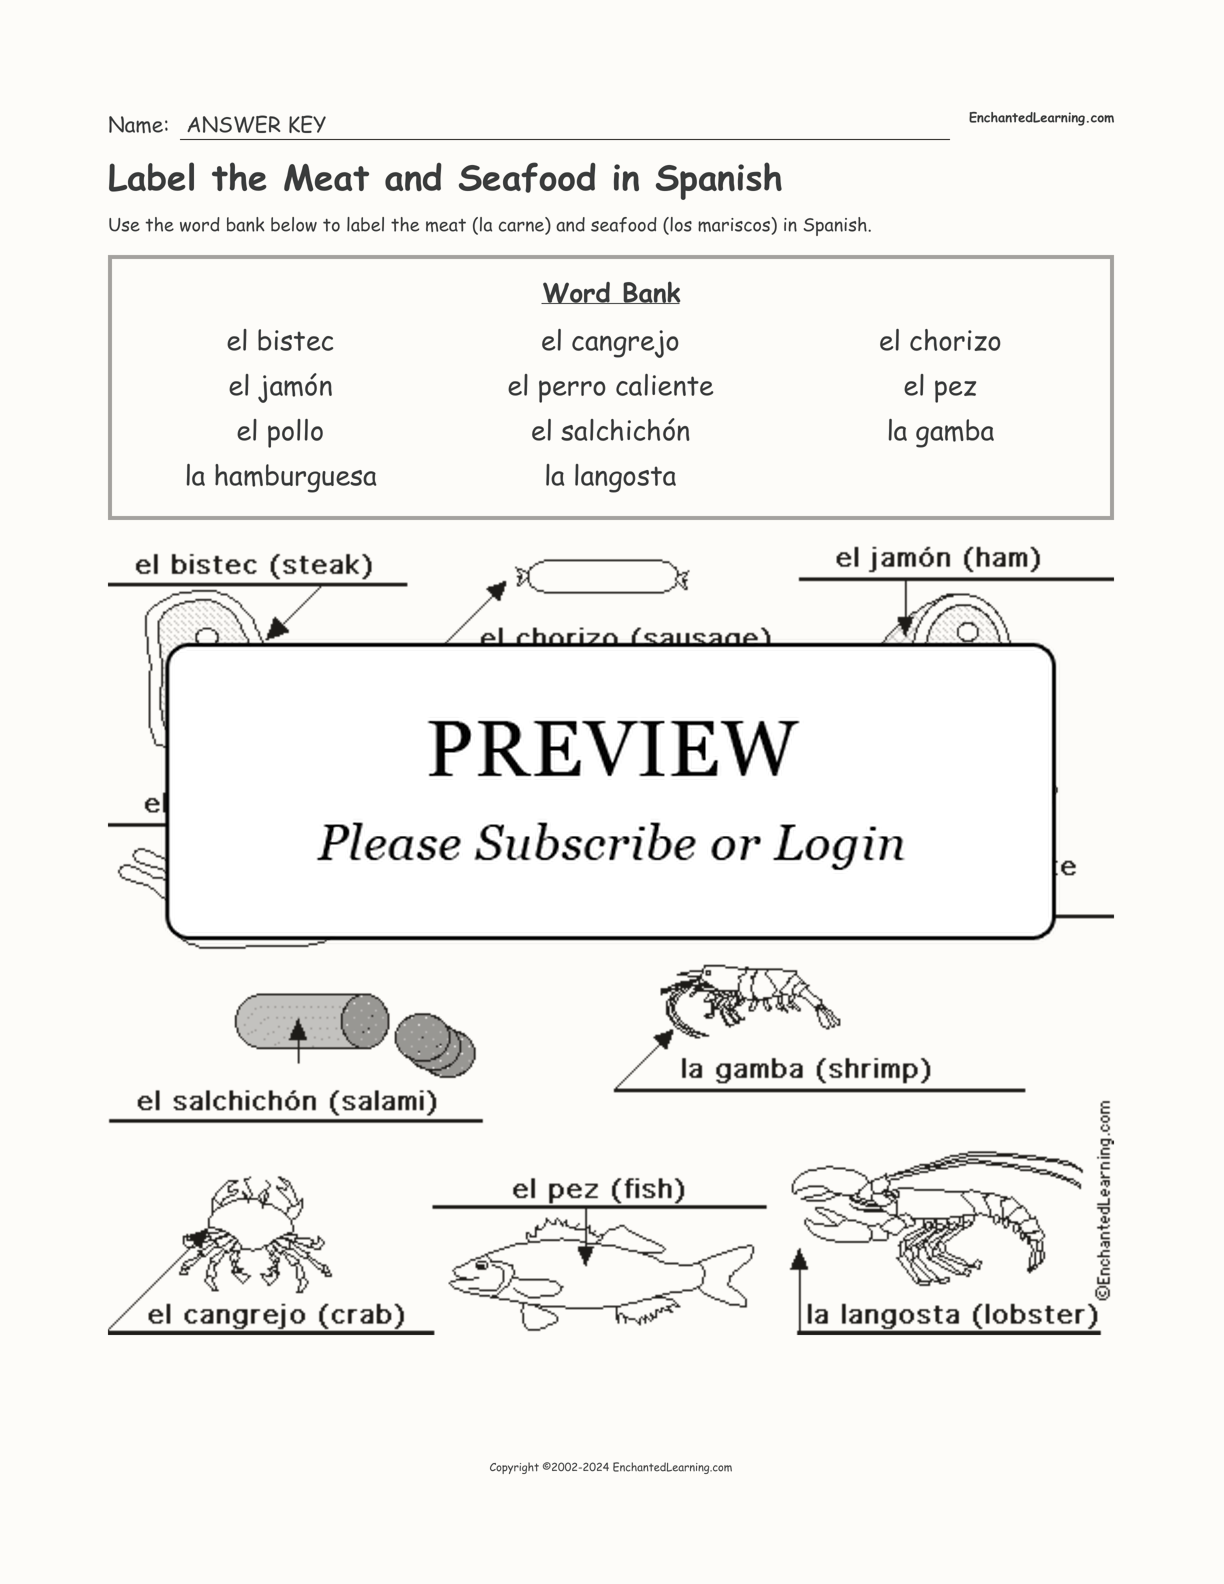 Label the Meat and Seafood in Spanish interactive worksheet page 2